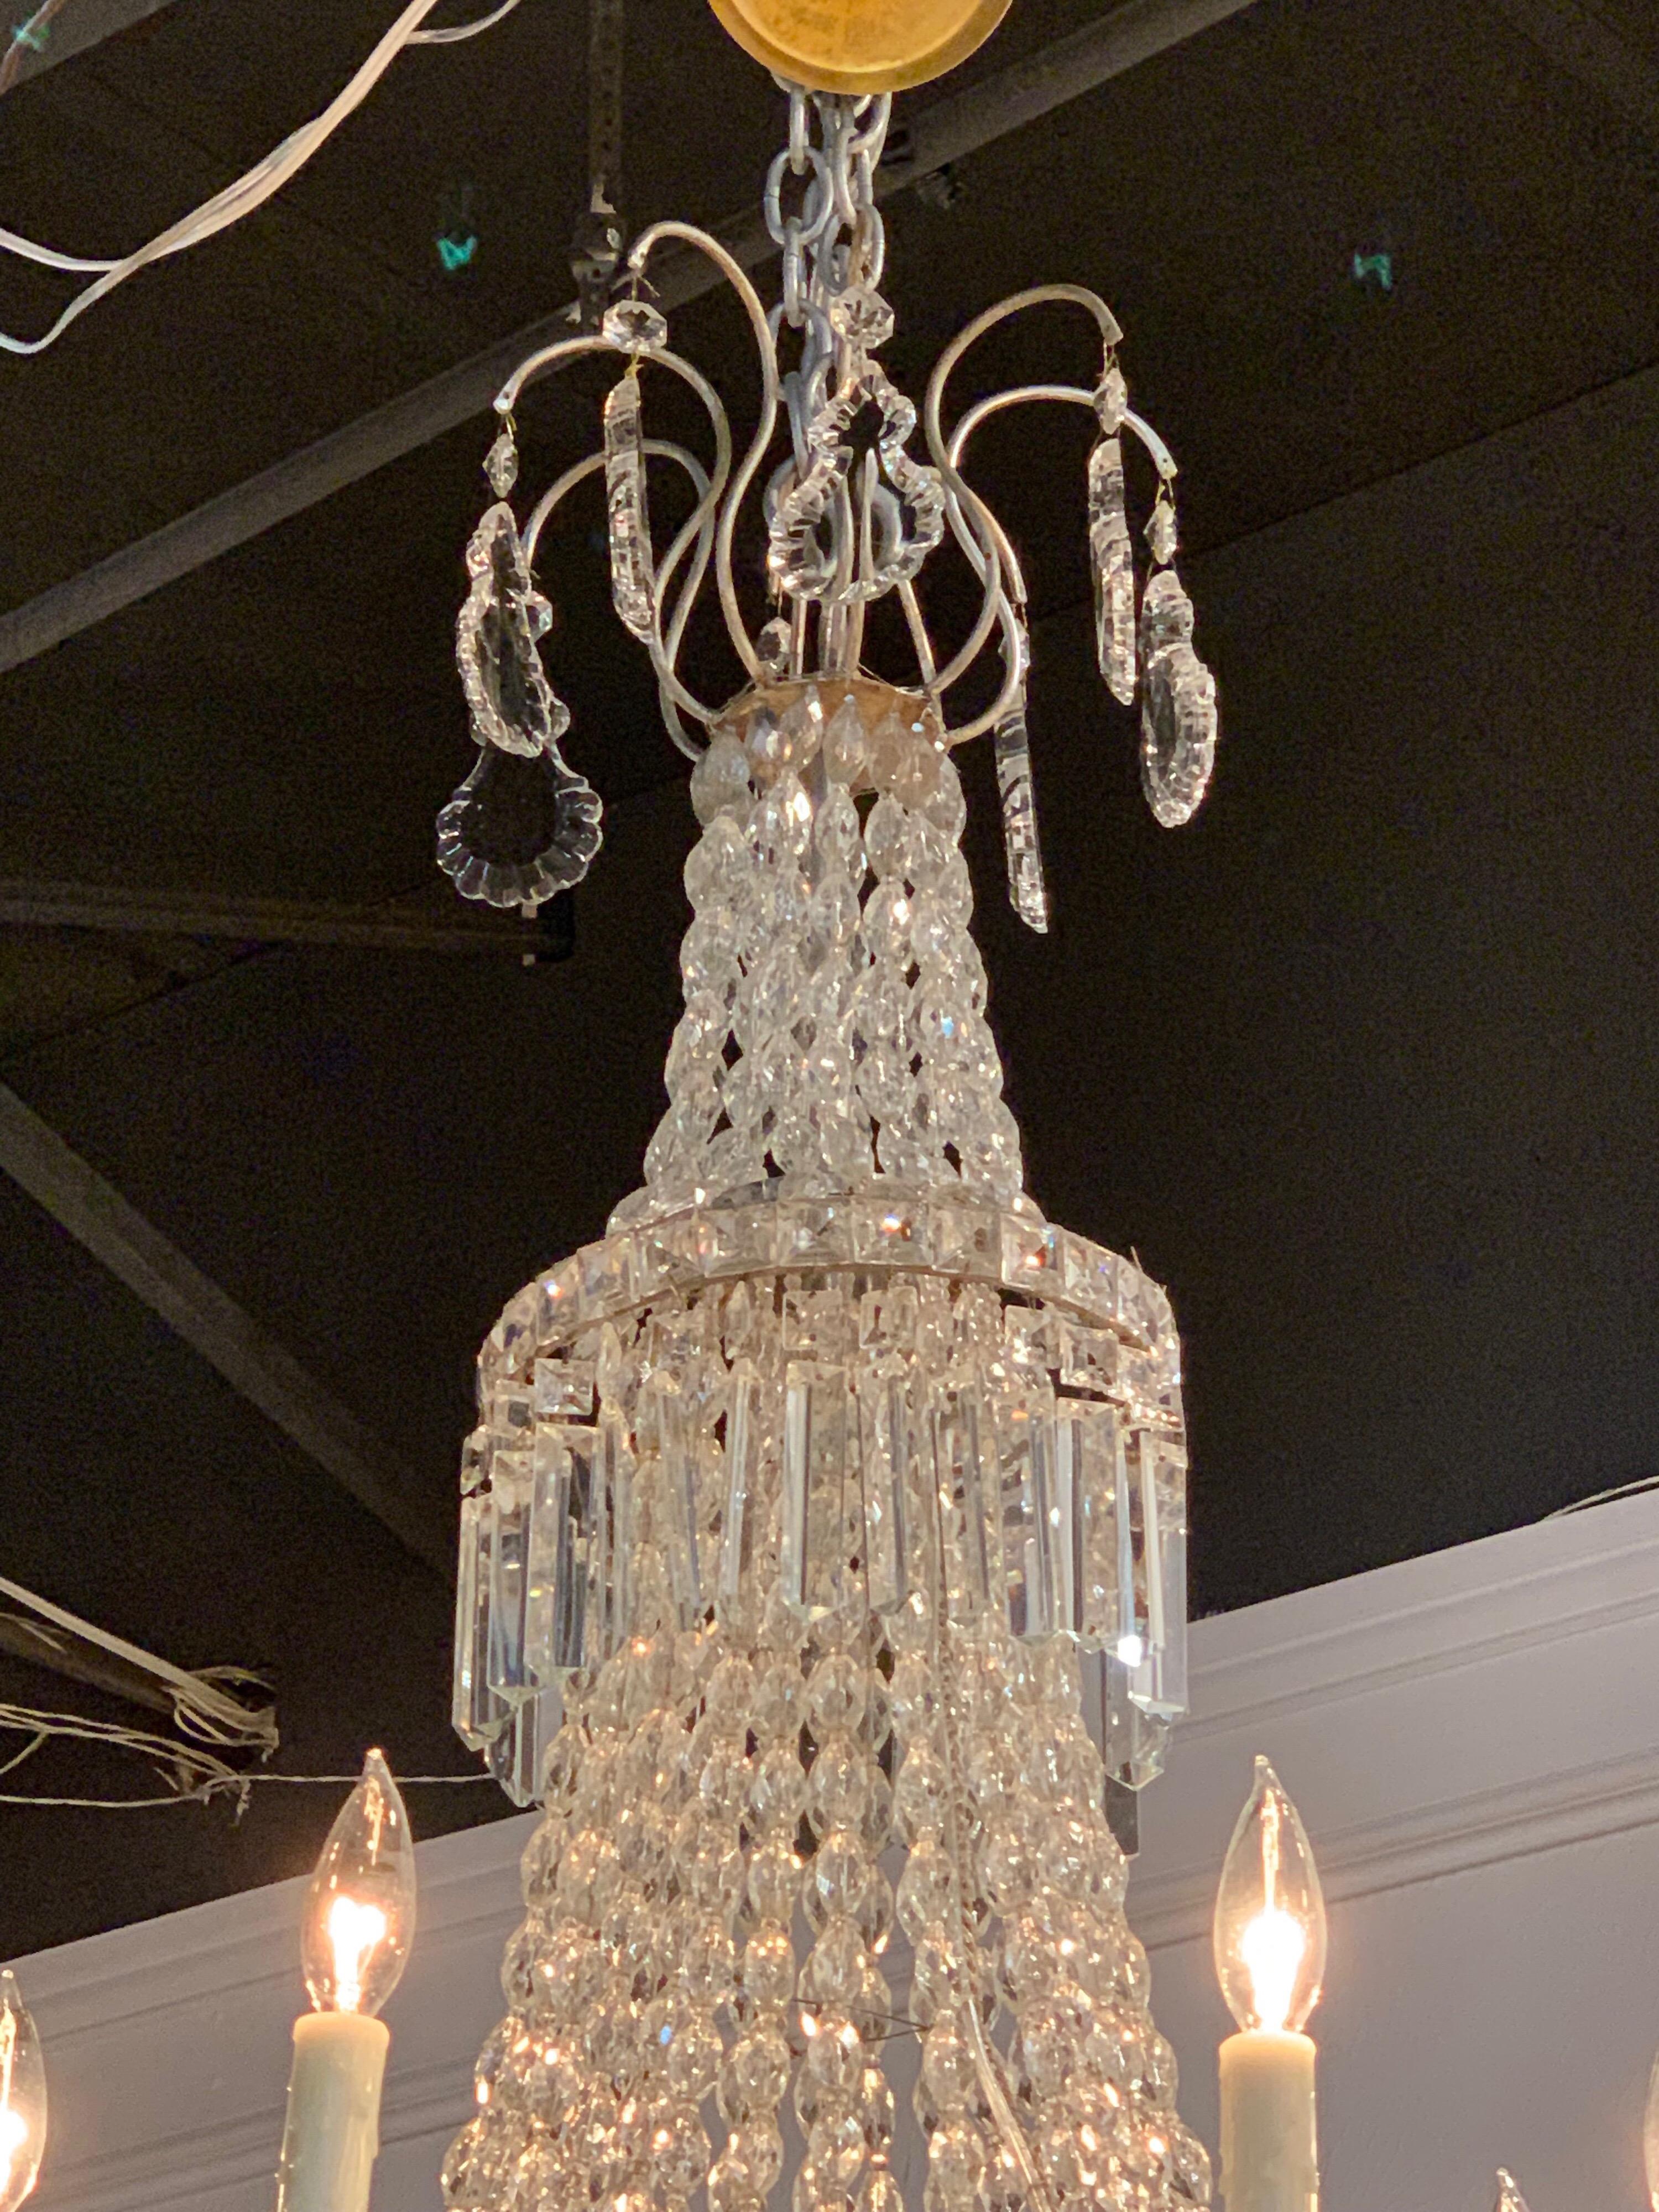 Gorgeous pair of 19th century basket form chandeliers from Sweden with 7 lights. These have beautiful beaded crystals and prisms. Very elegant! They come with a decorative chain and canopy, ready to hang.